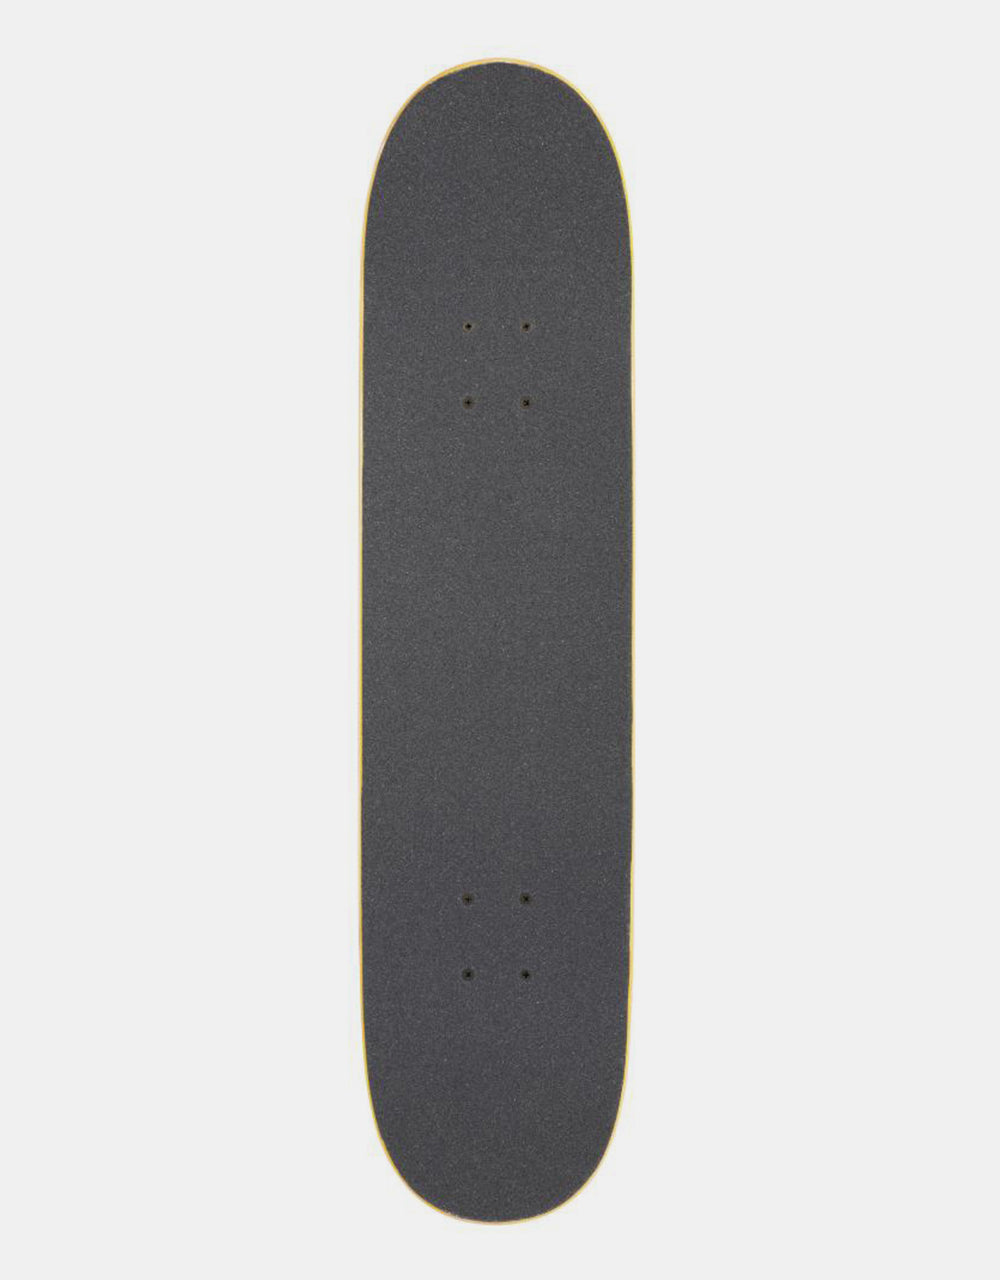 Arbor Whiskey Experience Complete Skateboard - 7.75"